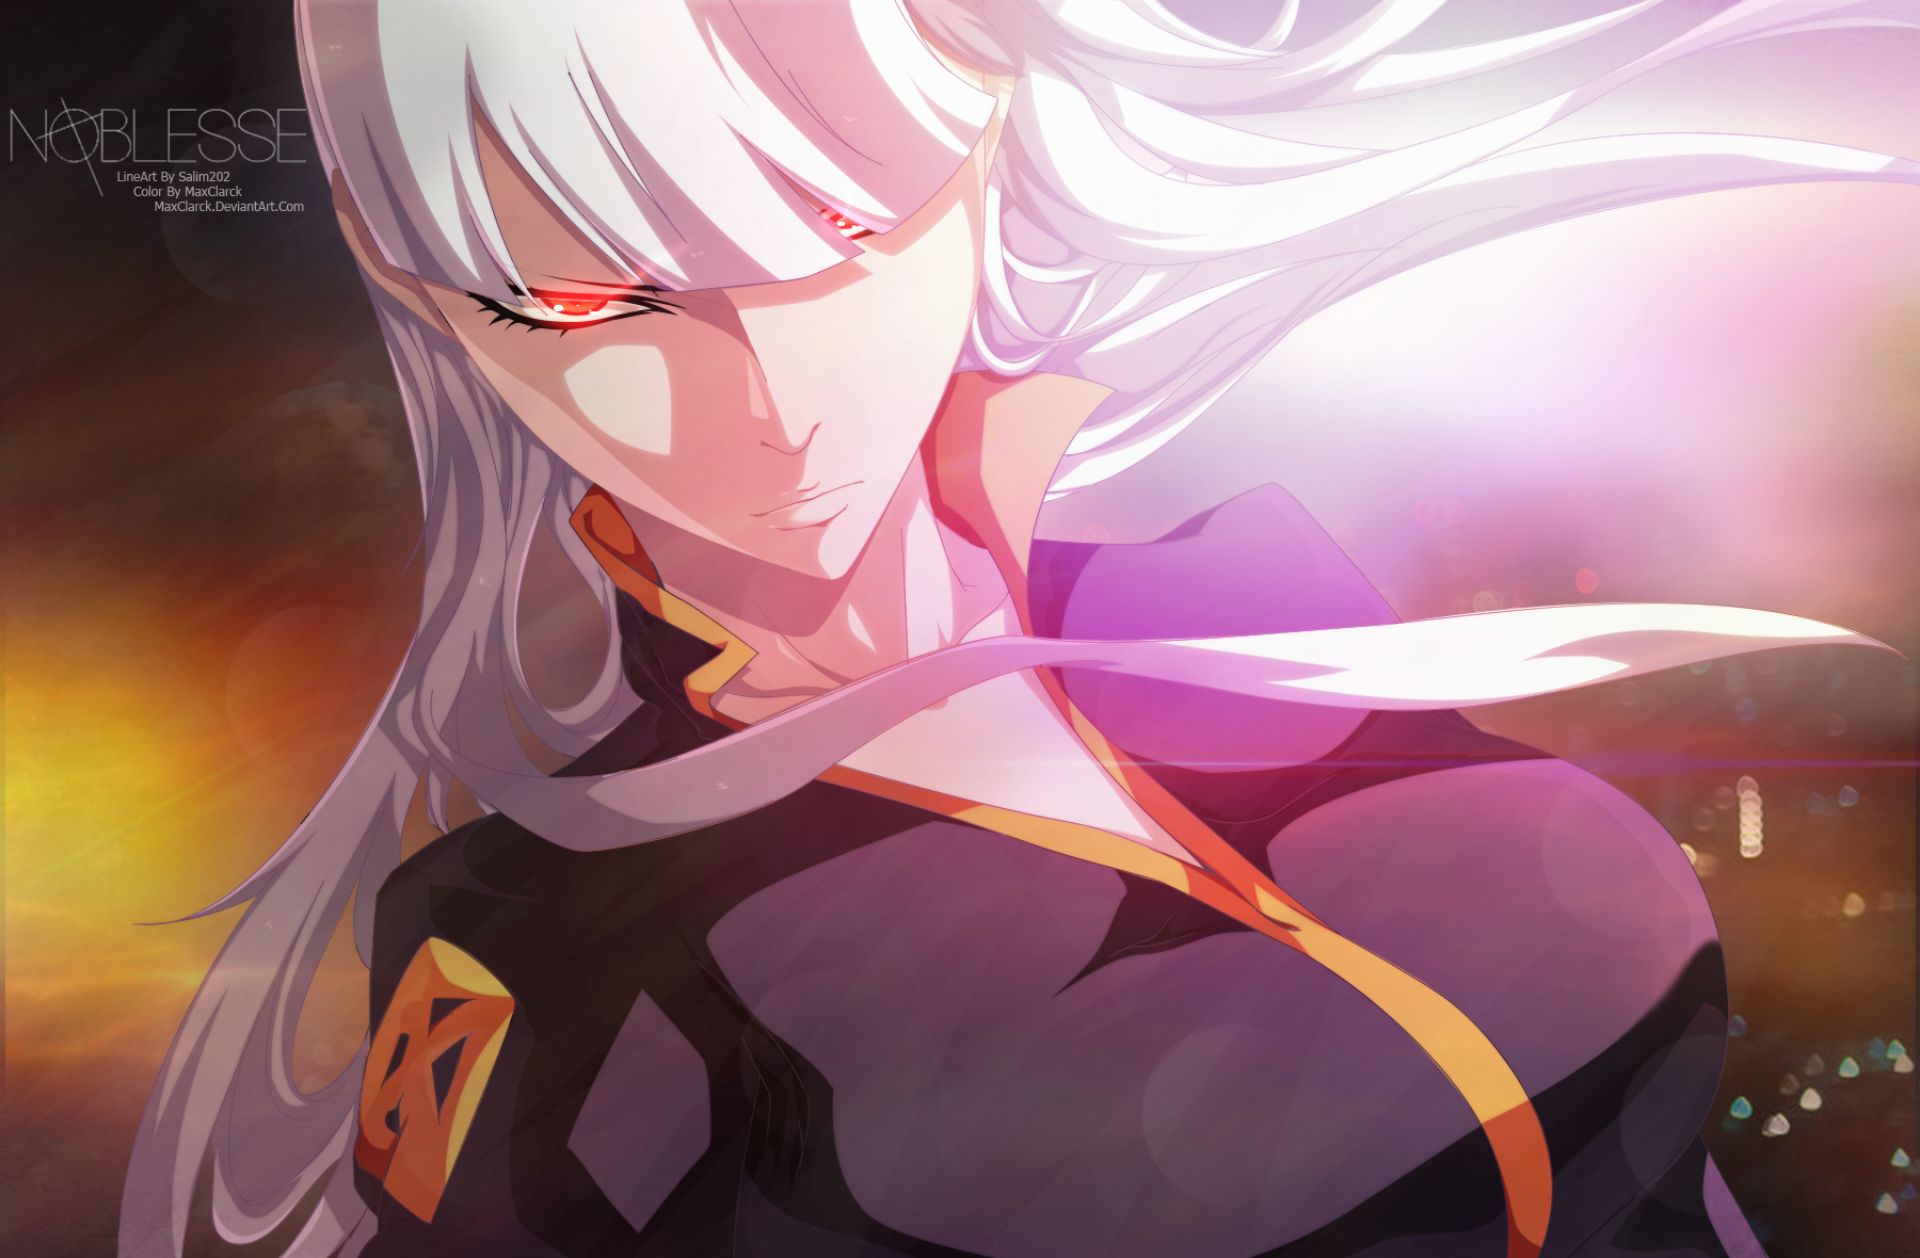 Tải xuống APK Noblesse Anime Wallpaper cho Android